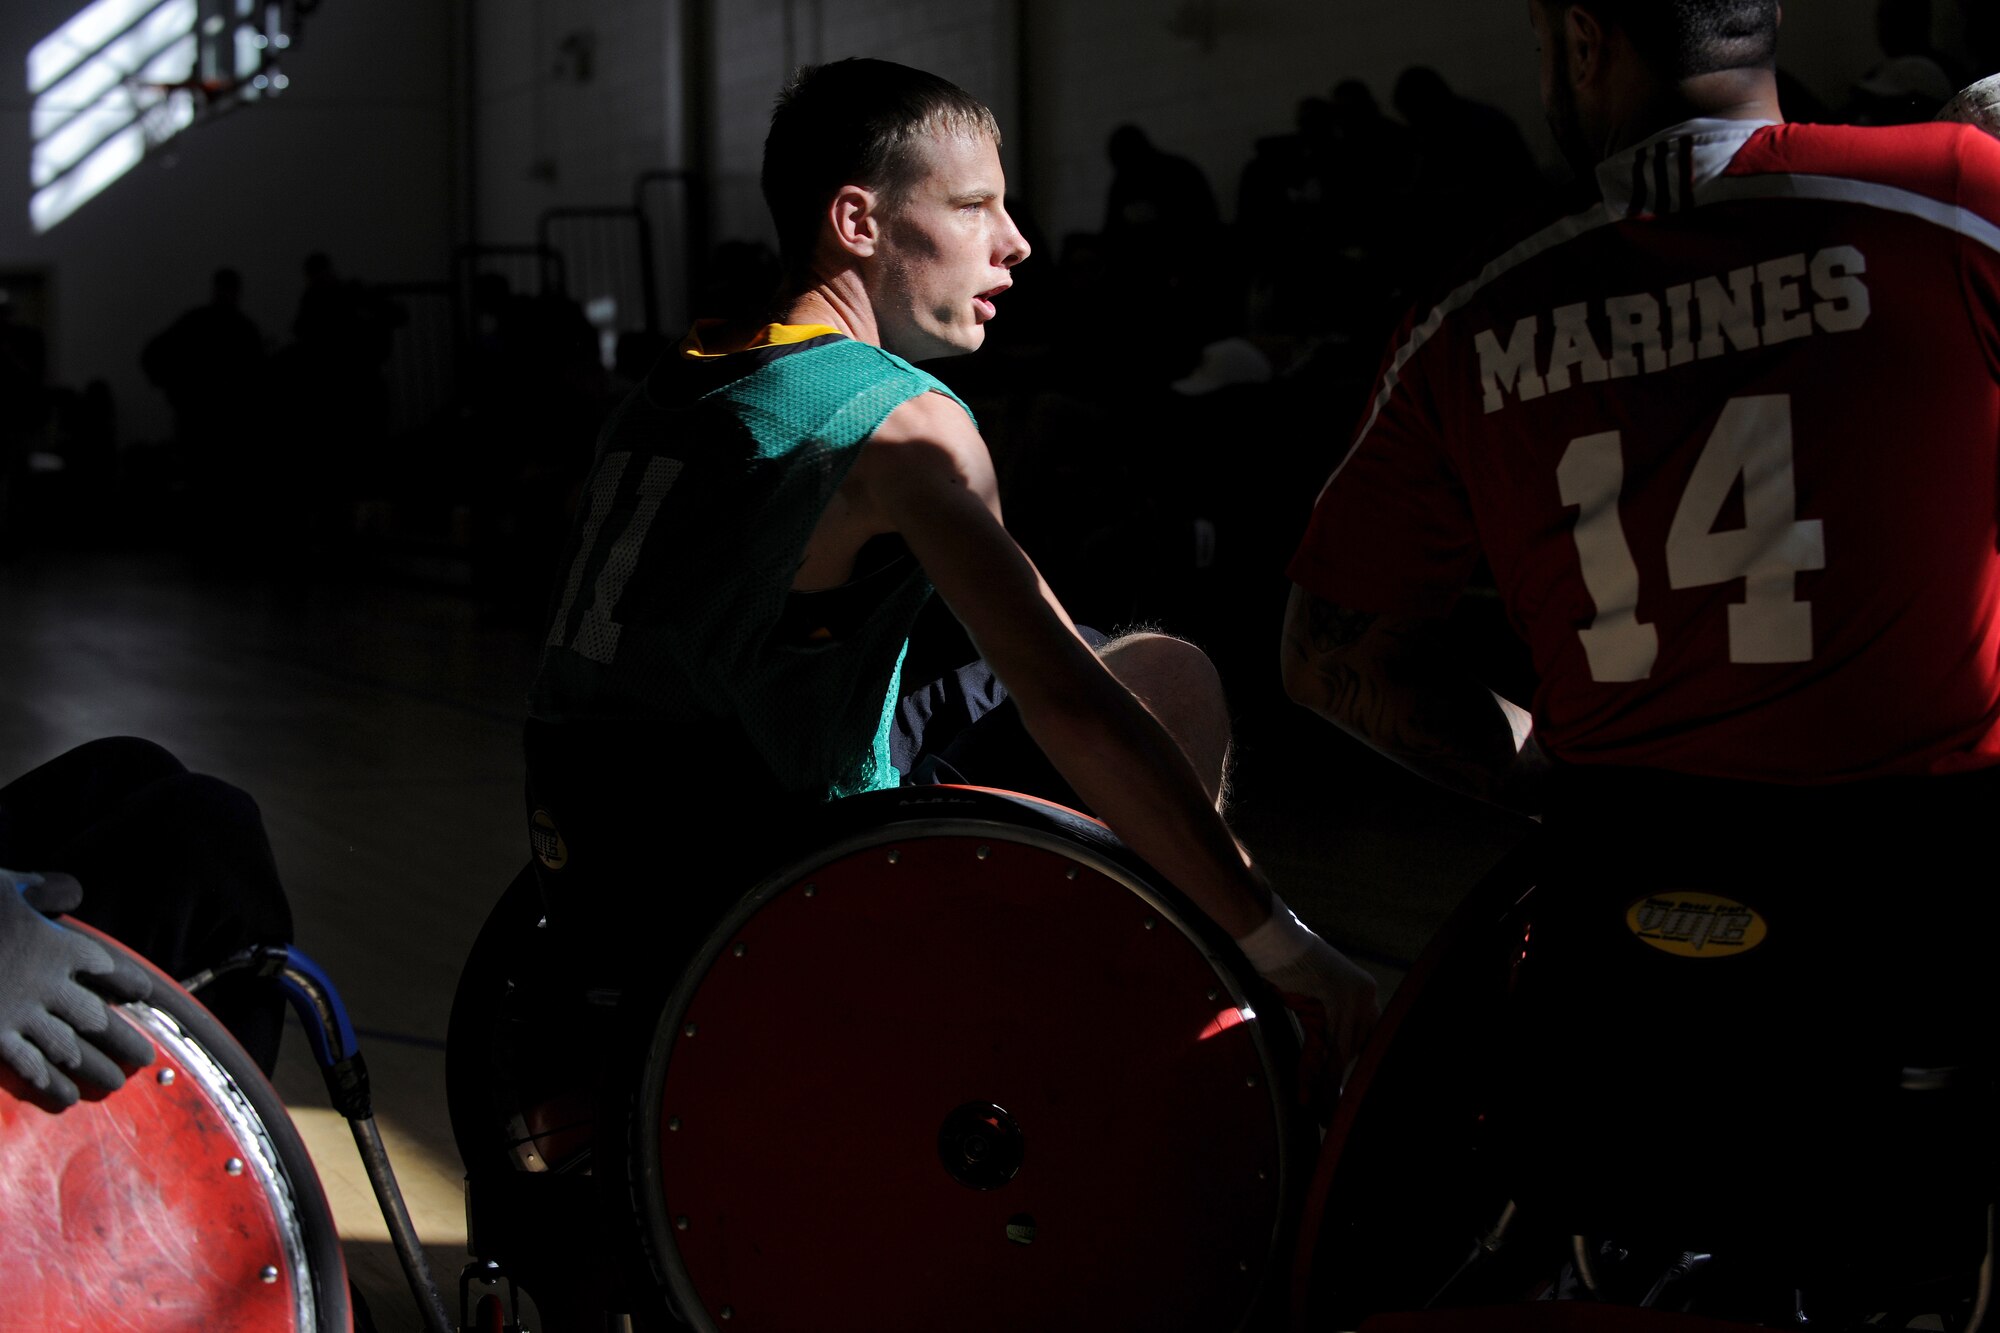 Wounded warriors practice wheelchair rugby during  the Northeast Region Warrior CARE Event at Joint Base Andrews, Md., Nov. 16. The event is in conjunction with Warrior Care Month, a month dedicated to honoring the courage, resilience and accomplishments of wounded, ill and injured service members, their families and their caregivers. (U.S. Air Force Photo/Tech. Sgt. Brian Ferguson)